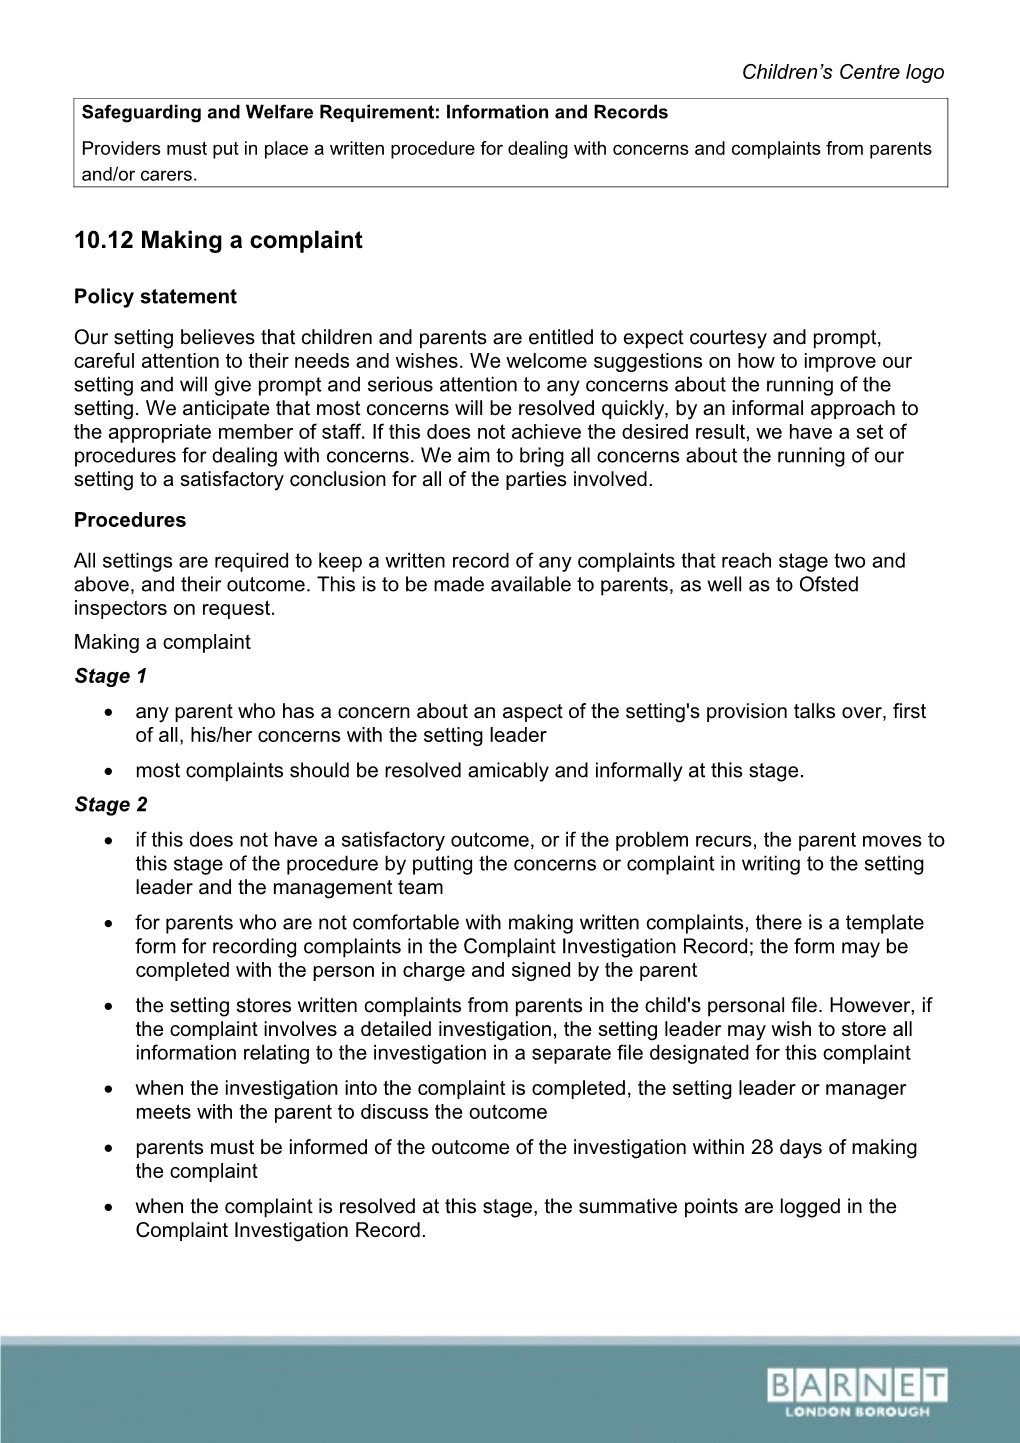 Safeguarding and Welfare Requirement:10.12 Making a Complaint